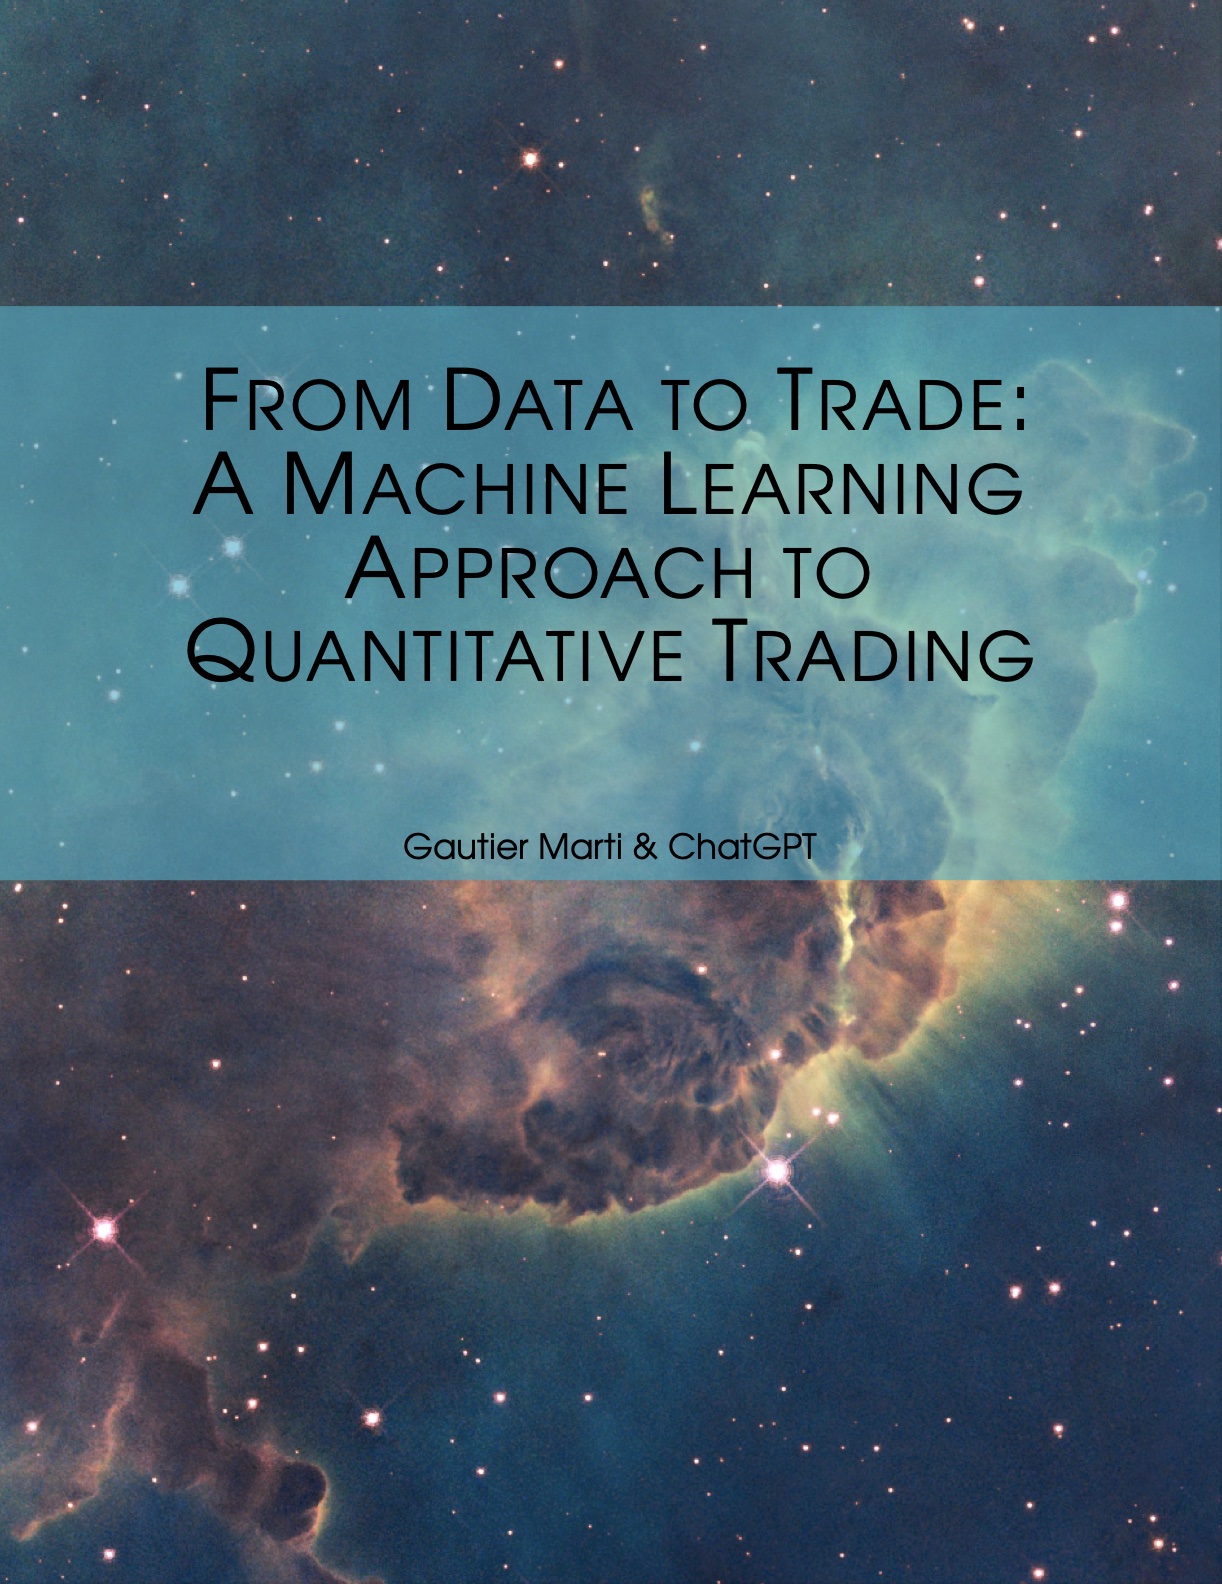 Cover of the book 'From Data to Trade'